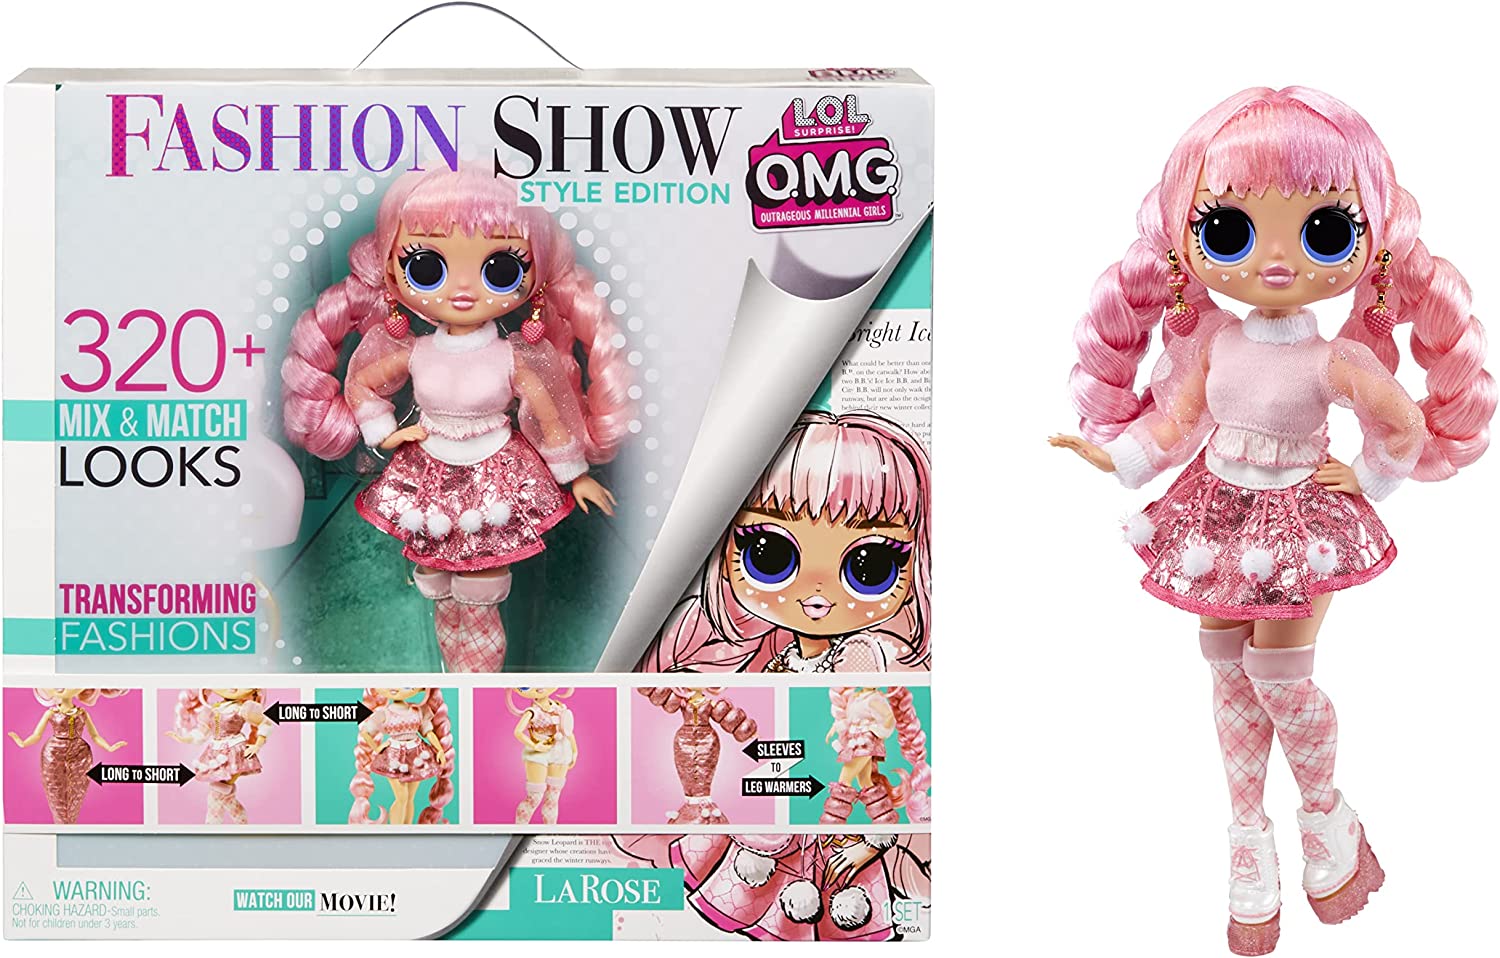 LOL OMG Fashion Show Style Edition dolls Missy Frost and LaRose